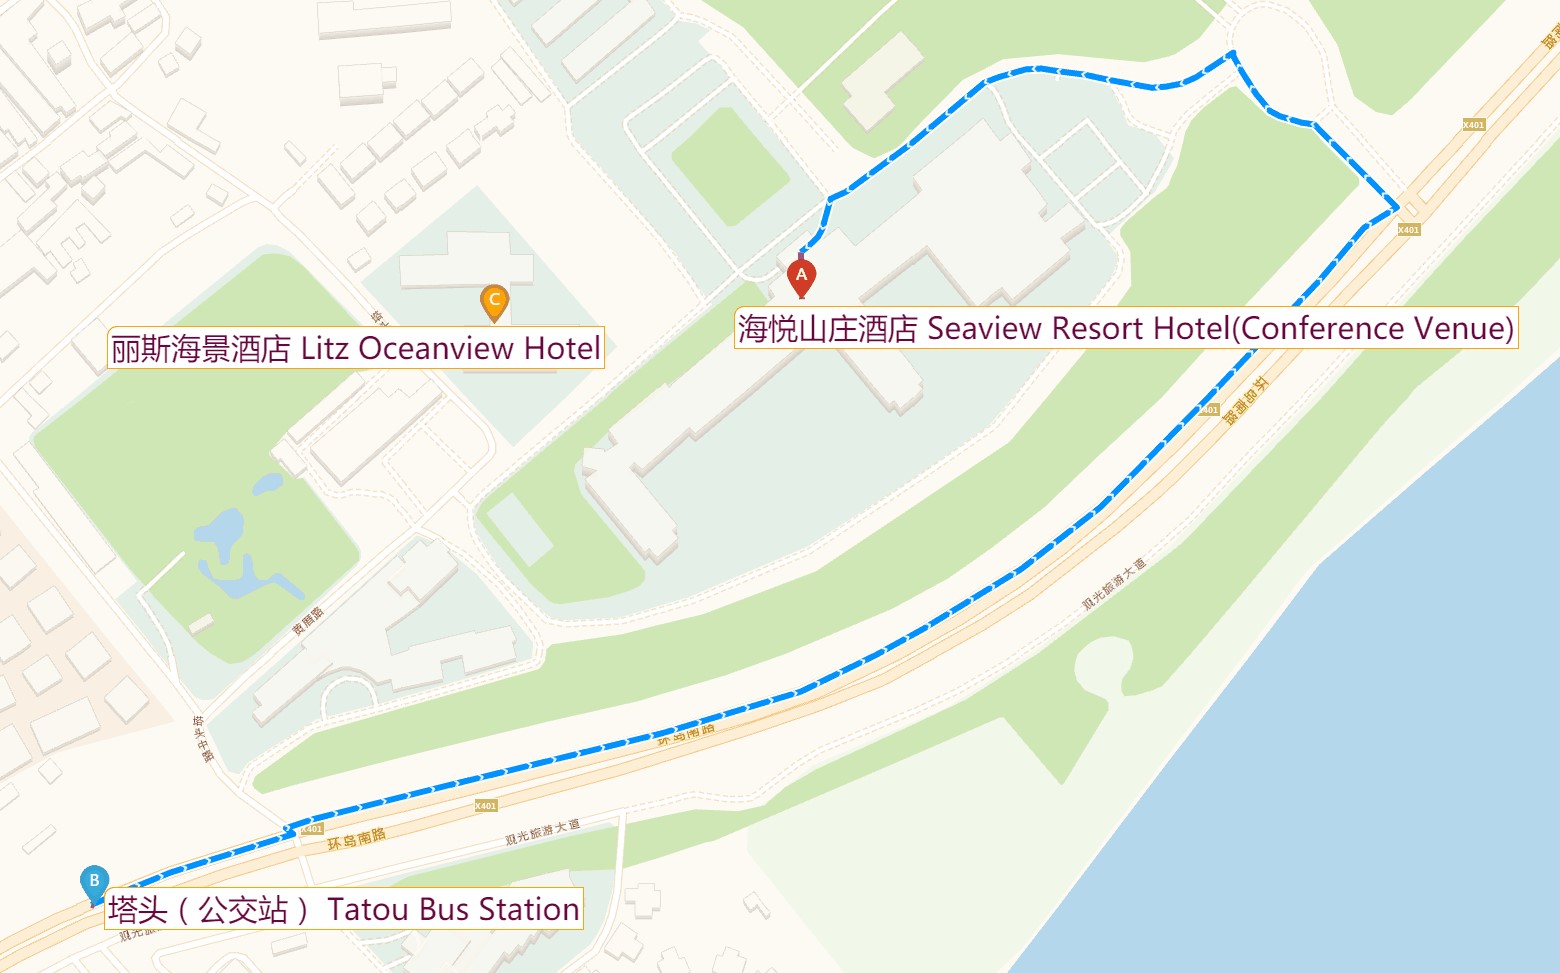 route from the bus station to the conference venue